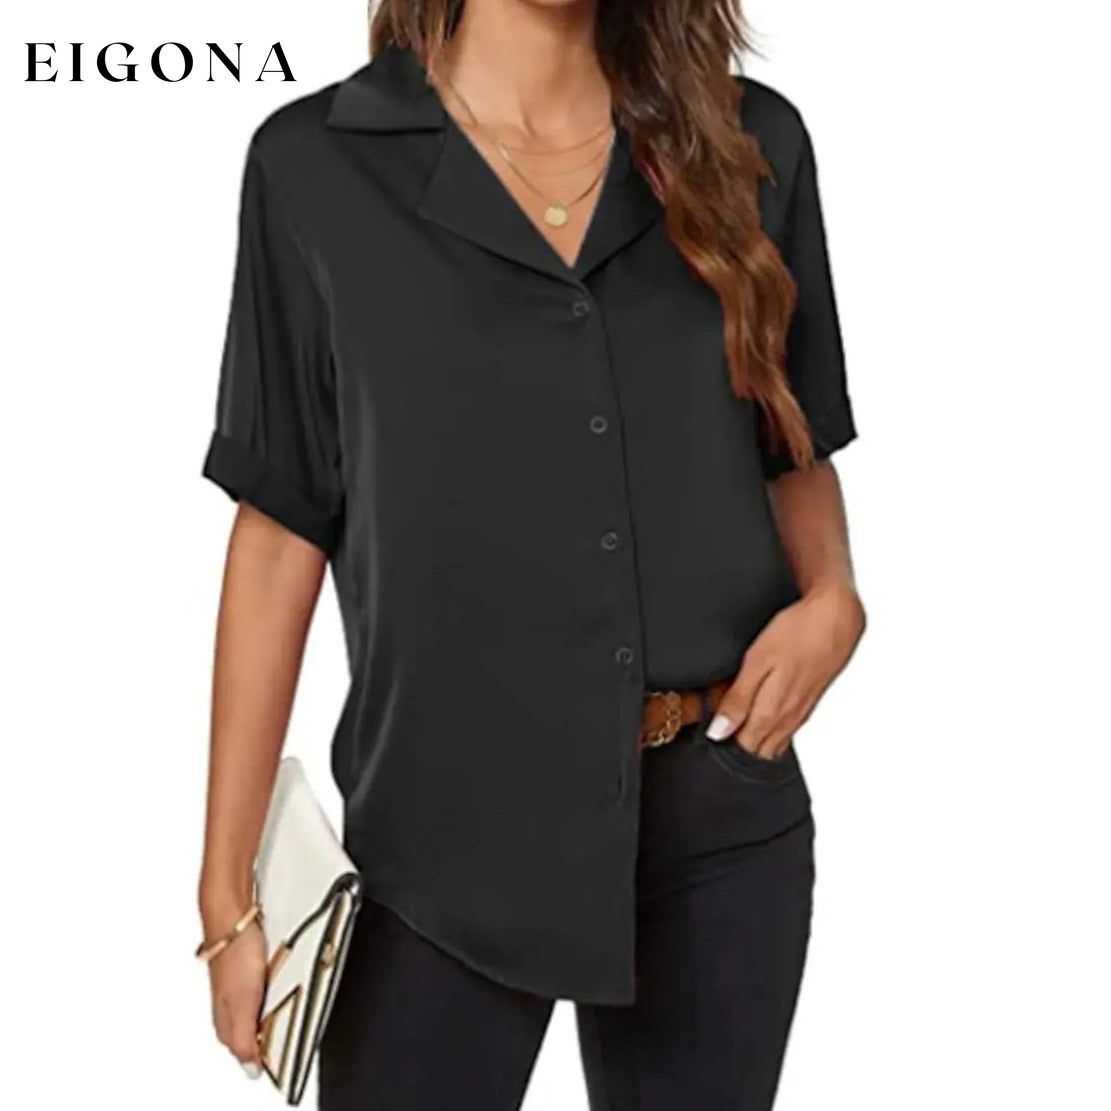 Women's Short Sleeve Casual Satin Button Down Shirt Black __stock:200 clothes Low stock refund_fee:800 tops